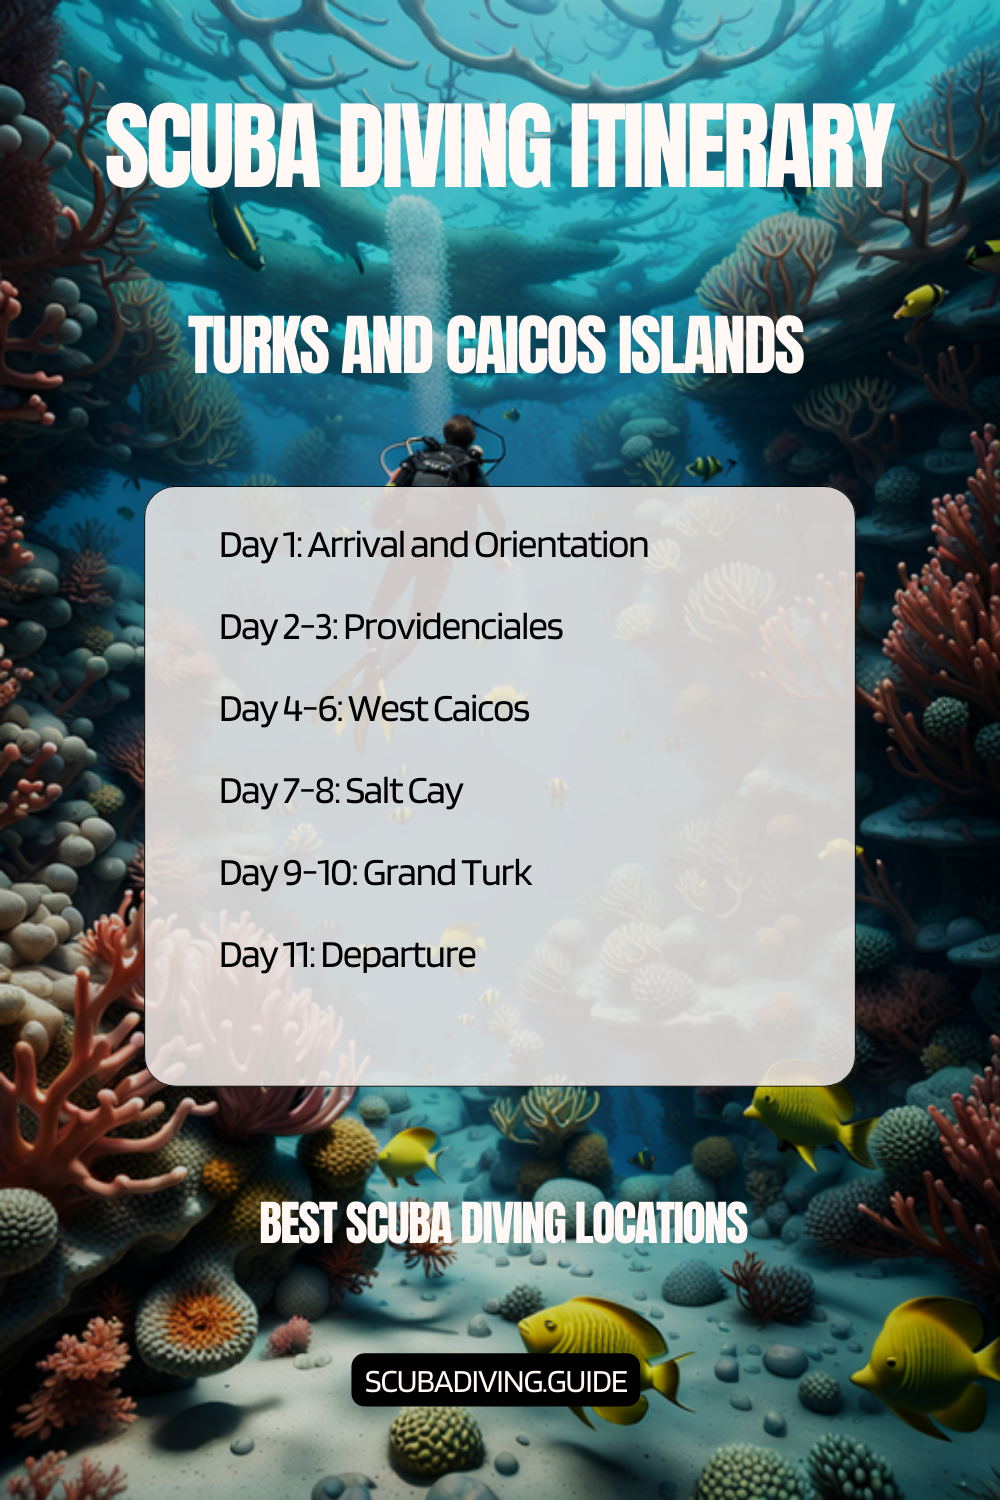 Turks And Caicos Islands Recommended Scuba Diving Itinerary